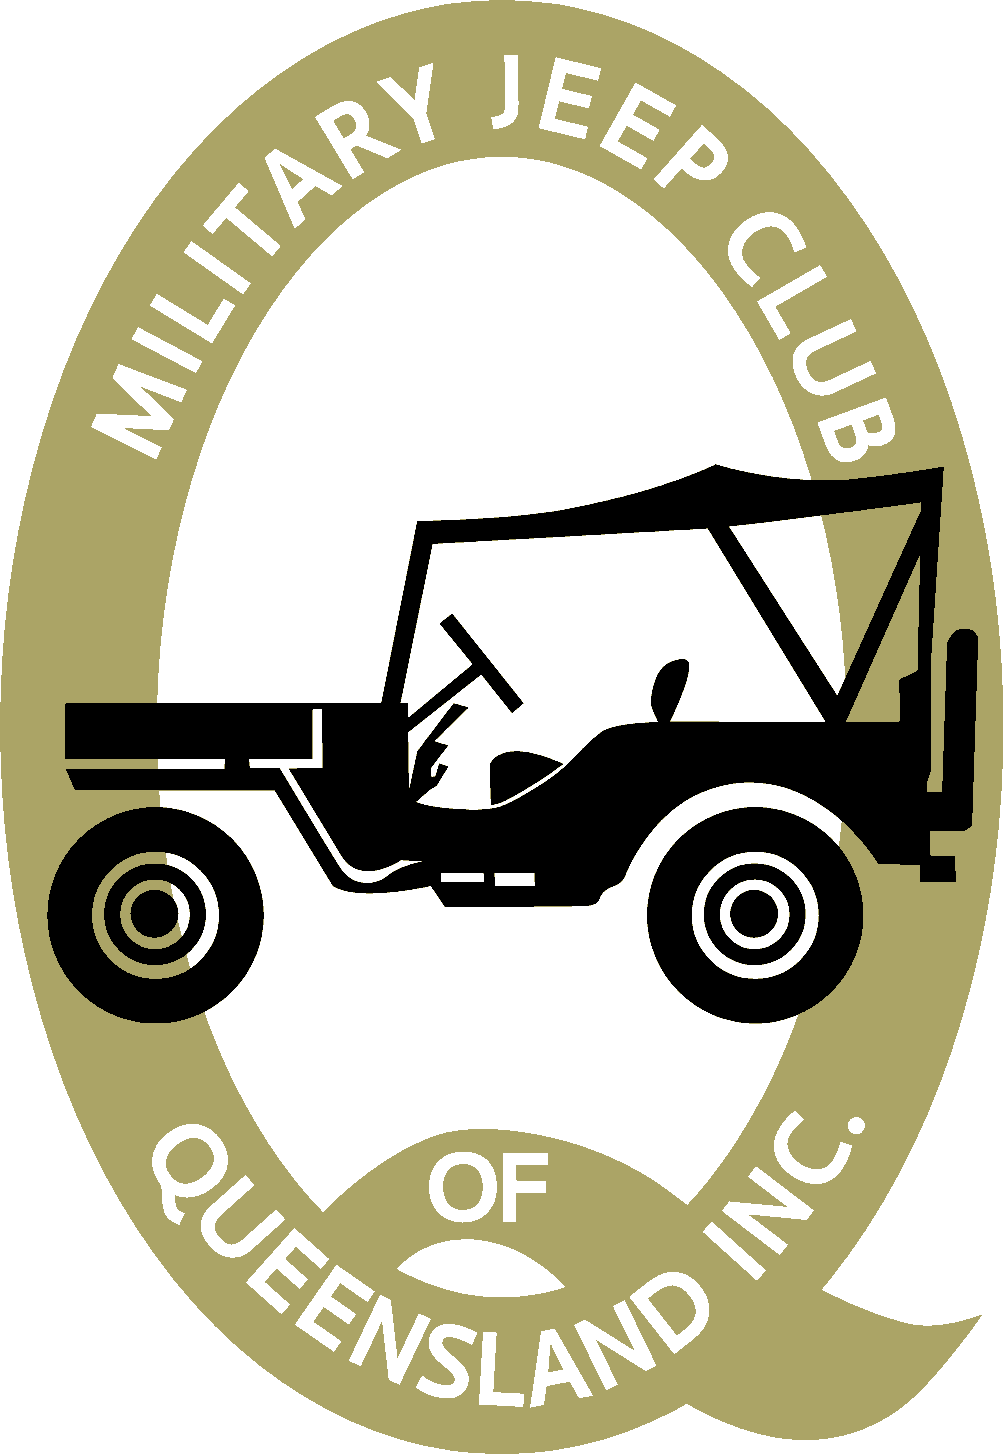 Military Jeep Club of Queensland Inc.